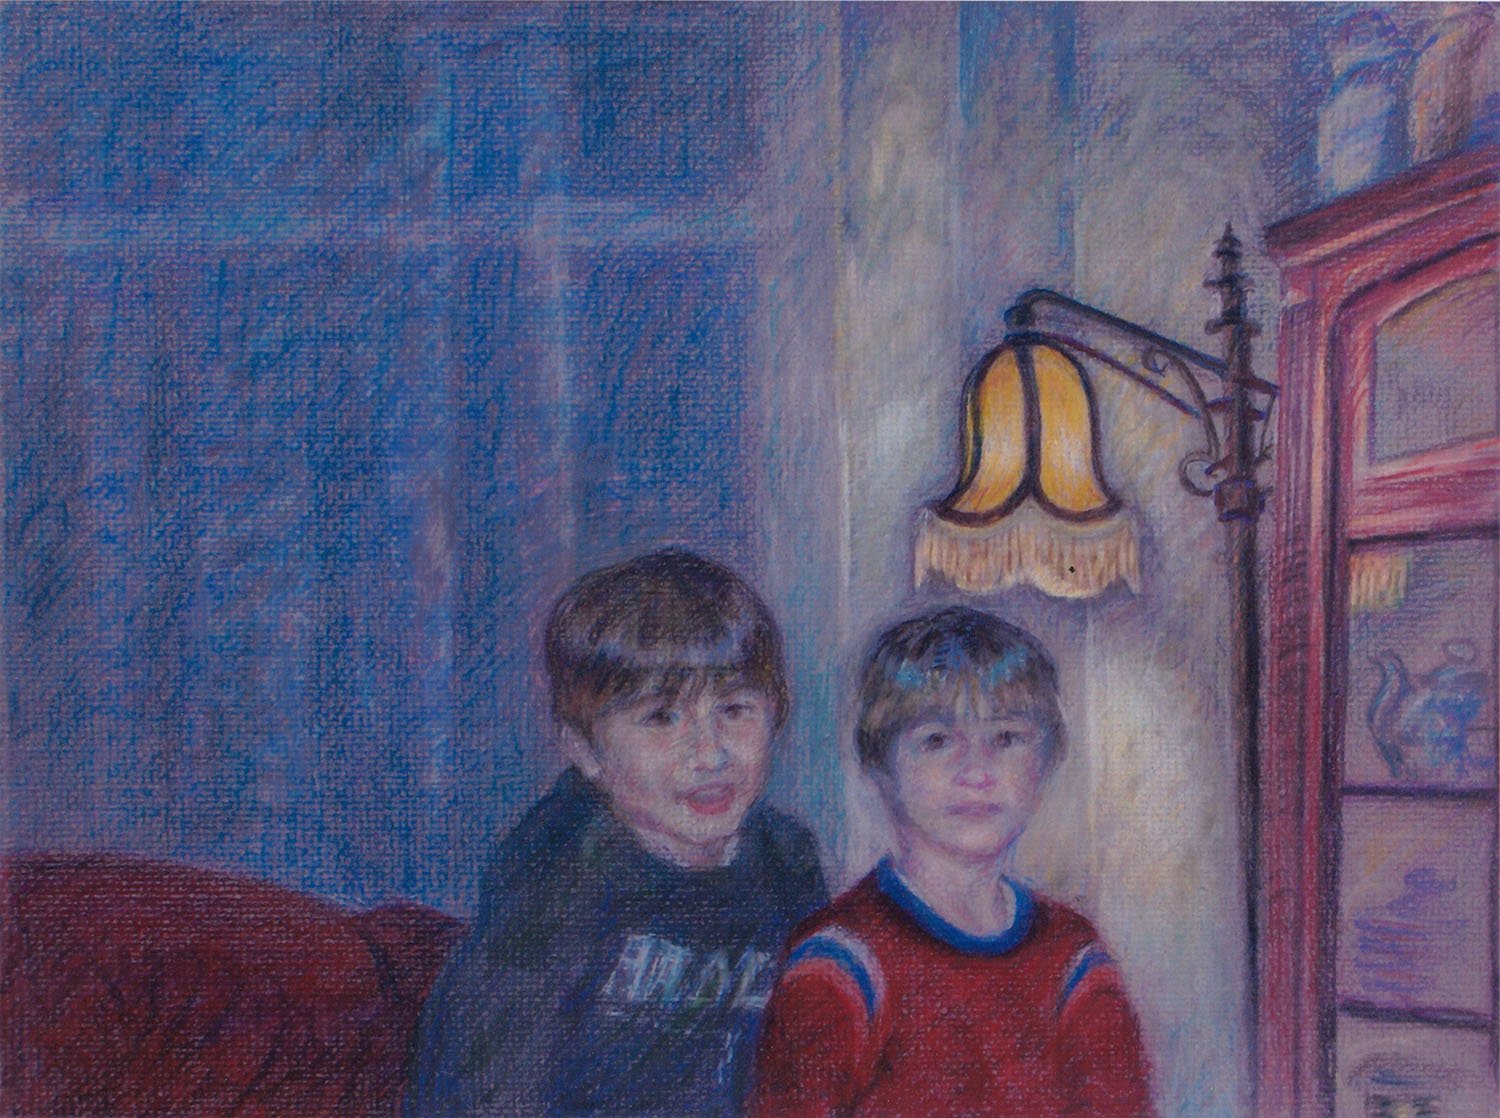    Leander and Spencer,   2006. Color pencils. 9” X 12”. (Private collection.) 